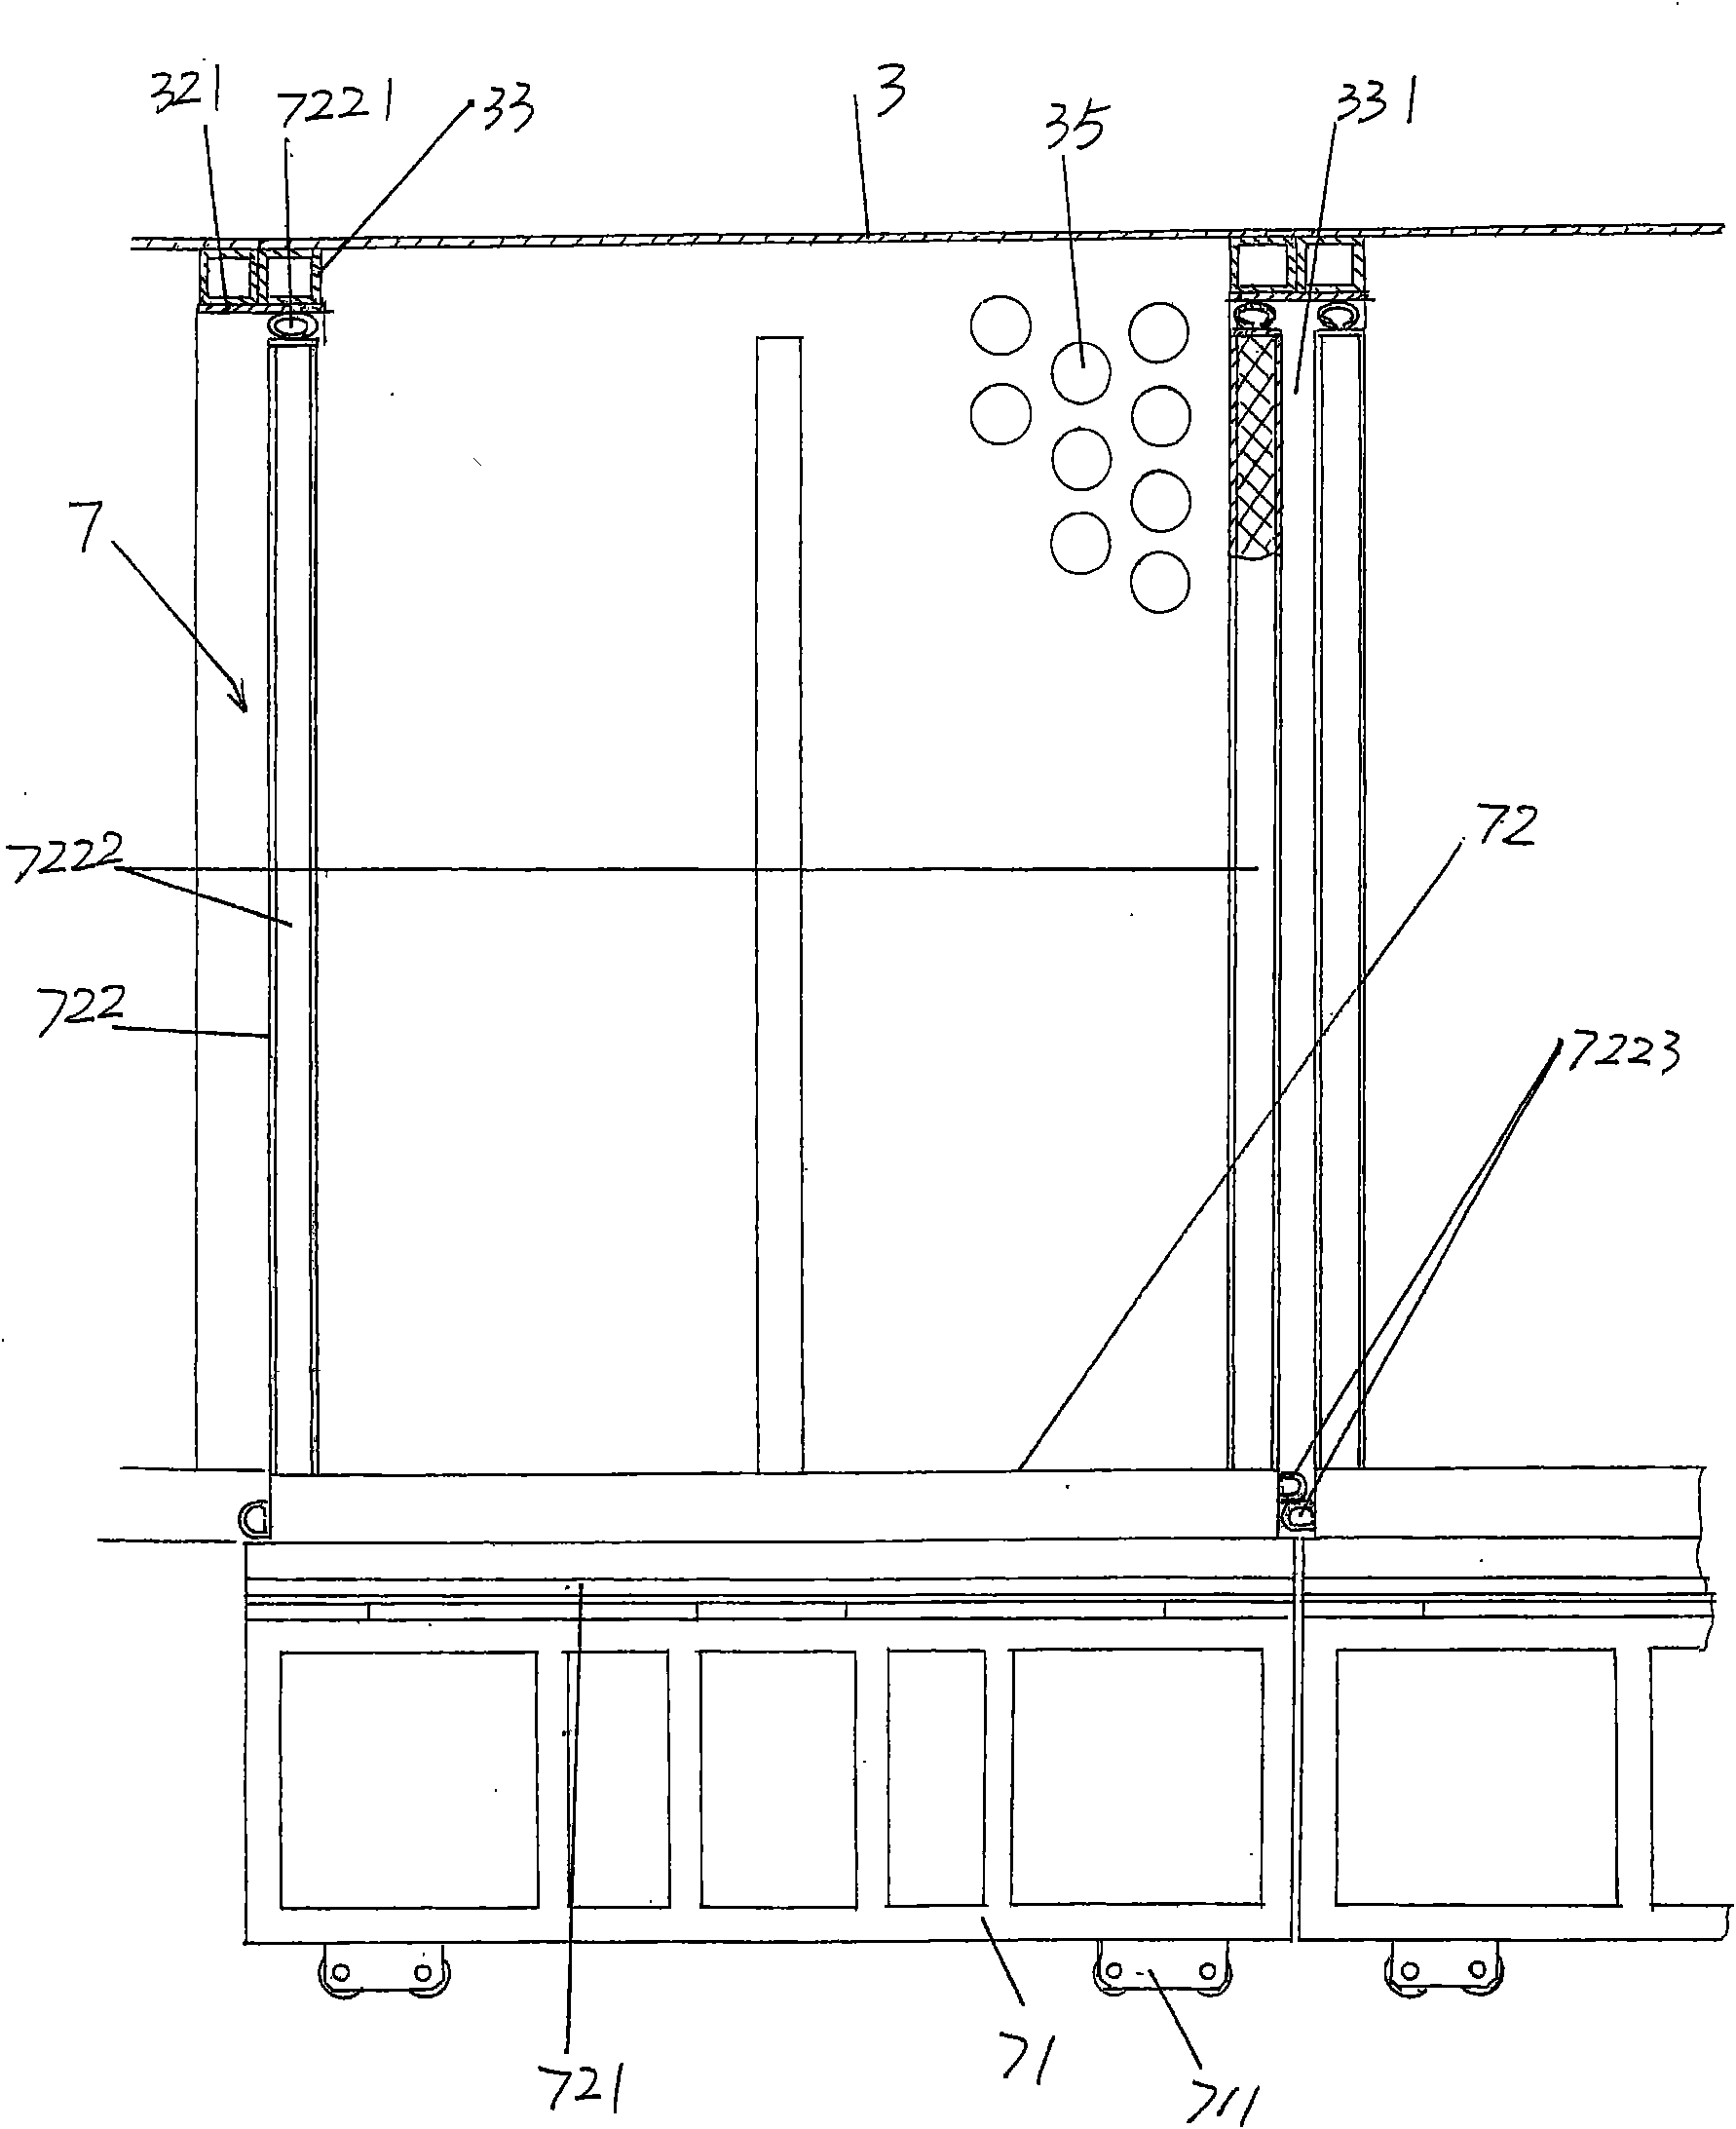 Sealing structure of electronic product annealing or sintering furnace and carrying cart